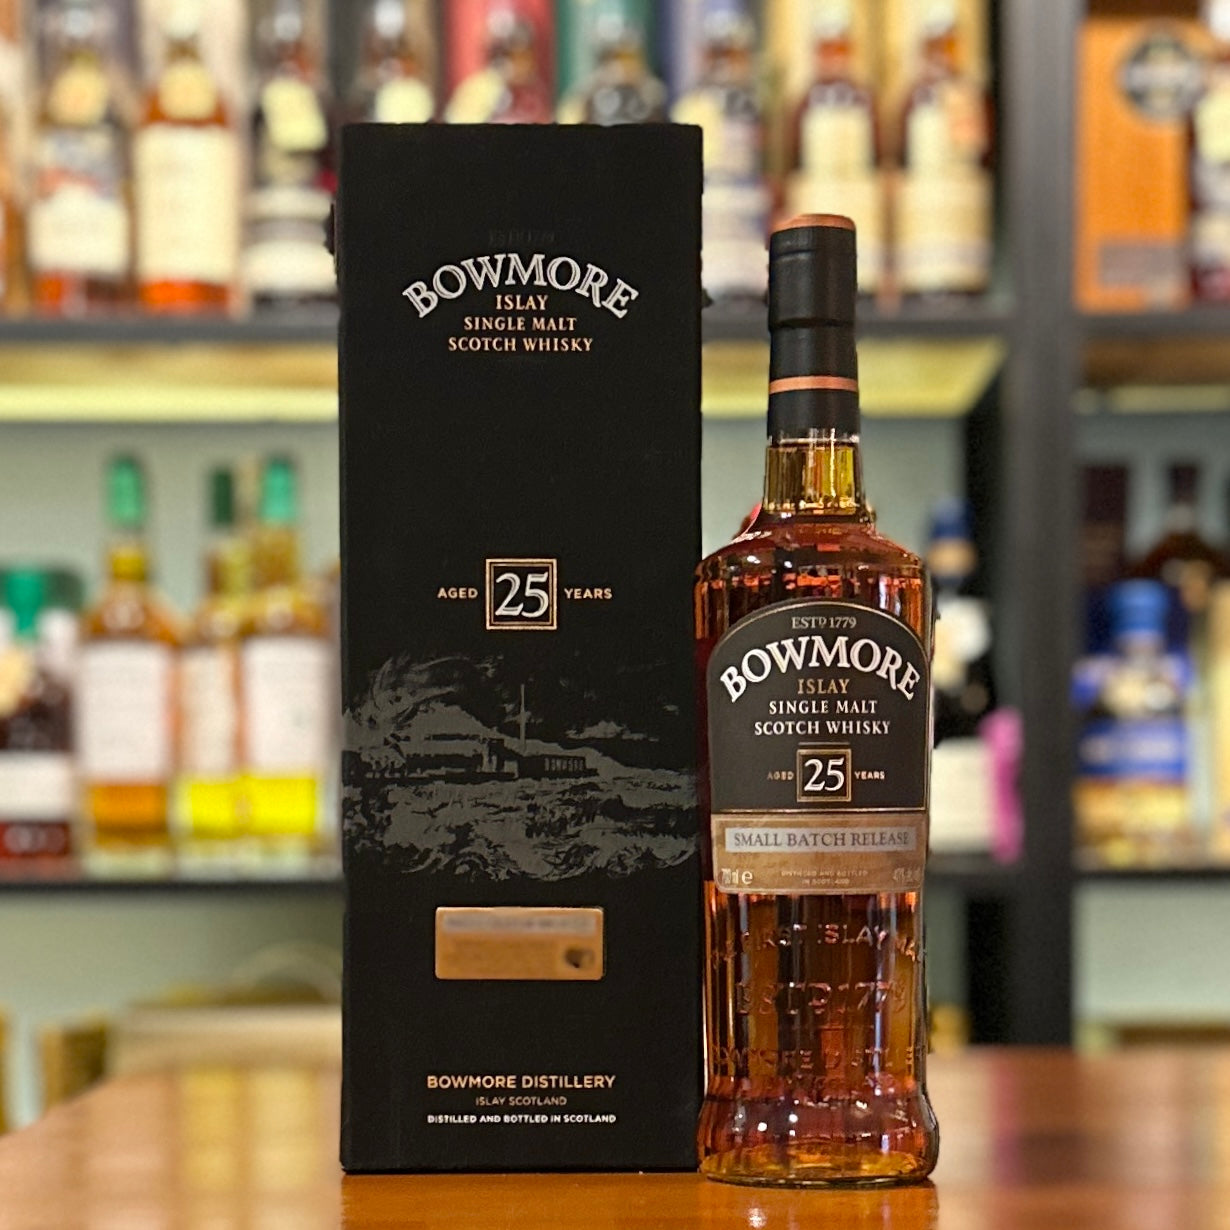 Bowmore 25 Year Old Small Batch Release Single Malt Scotch Whisky